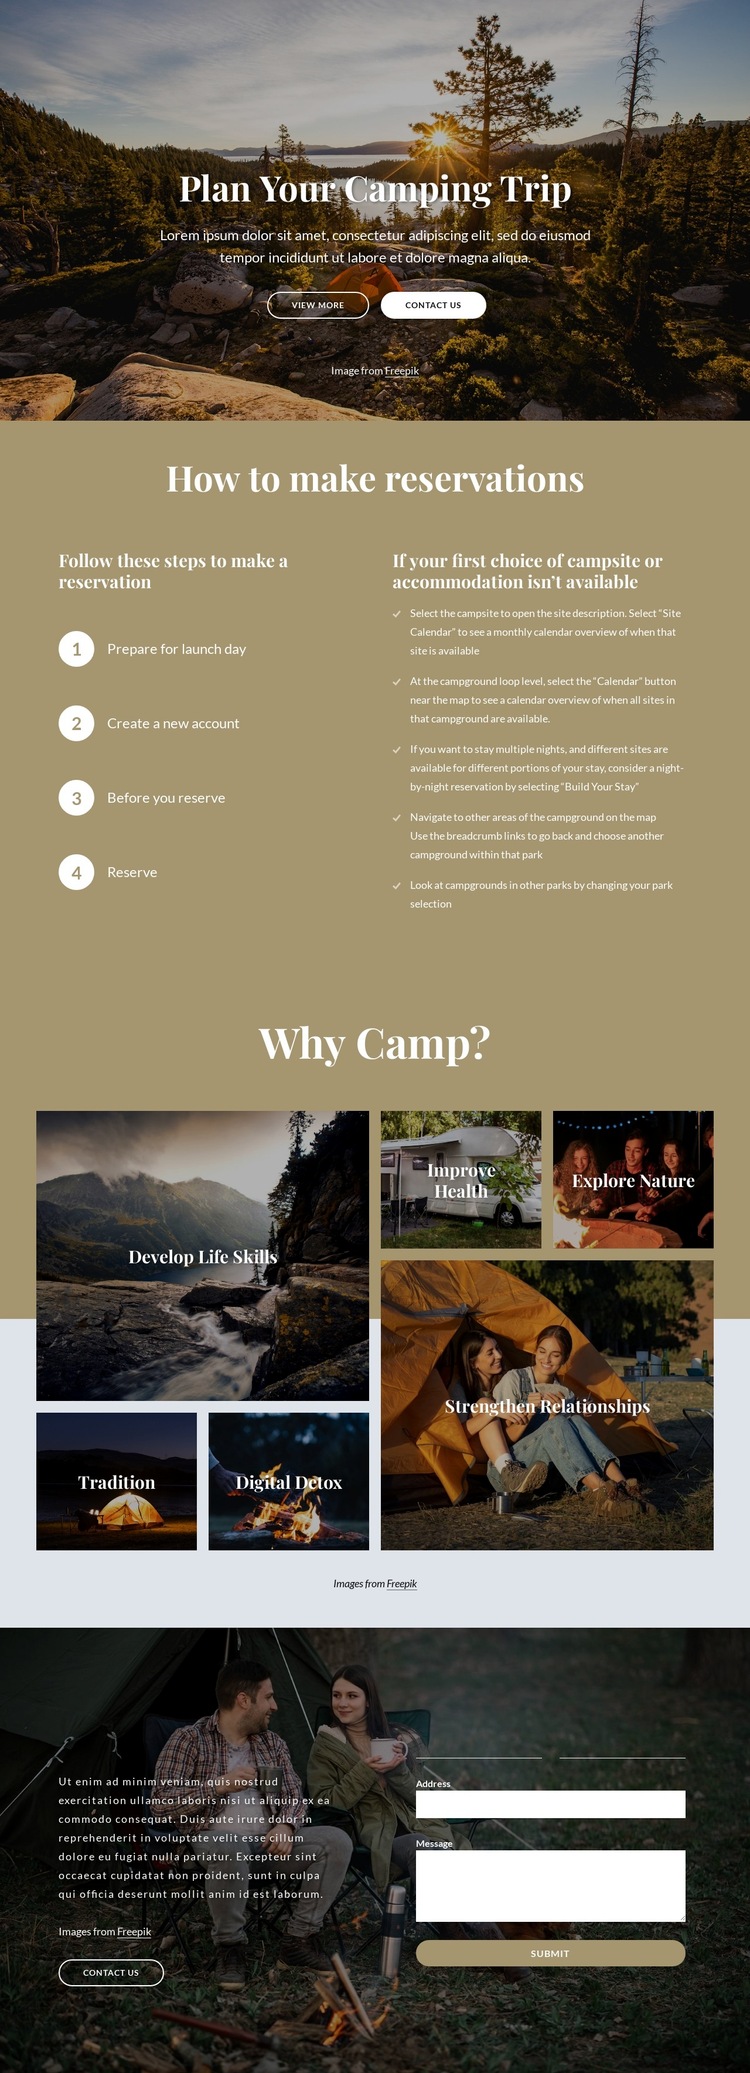 Plan your camping trip HTML5 Template